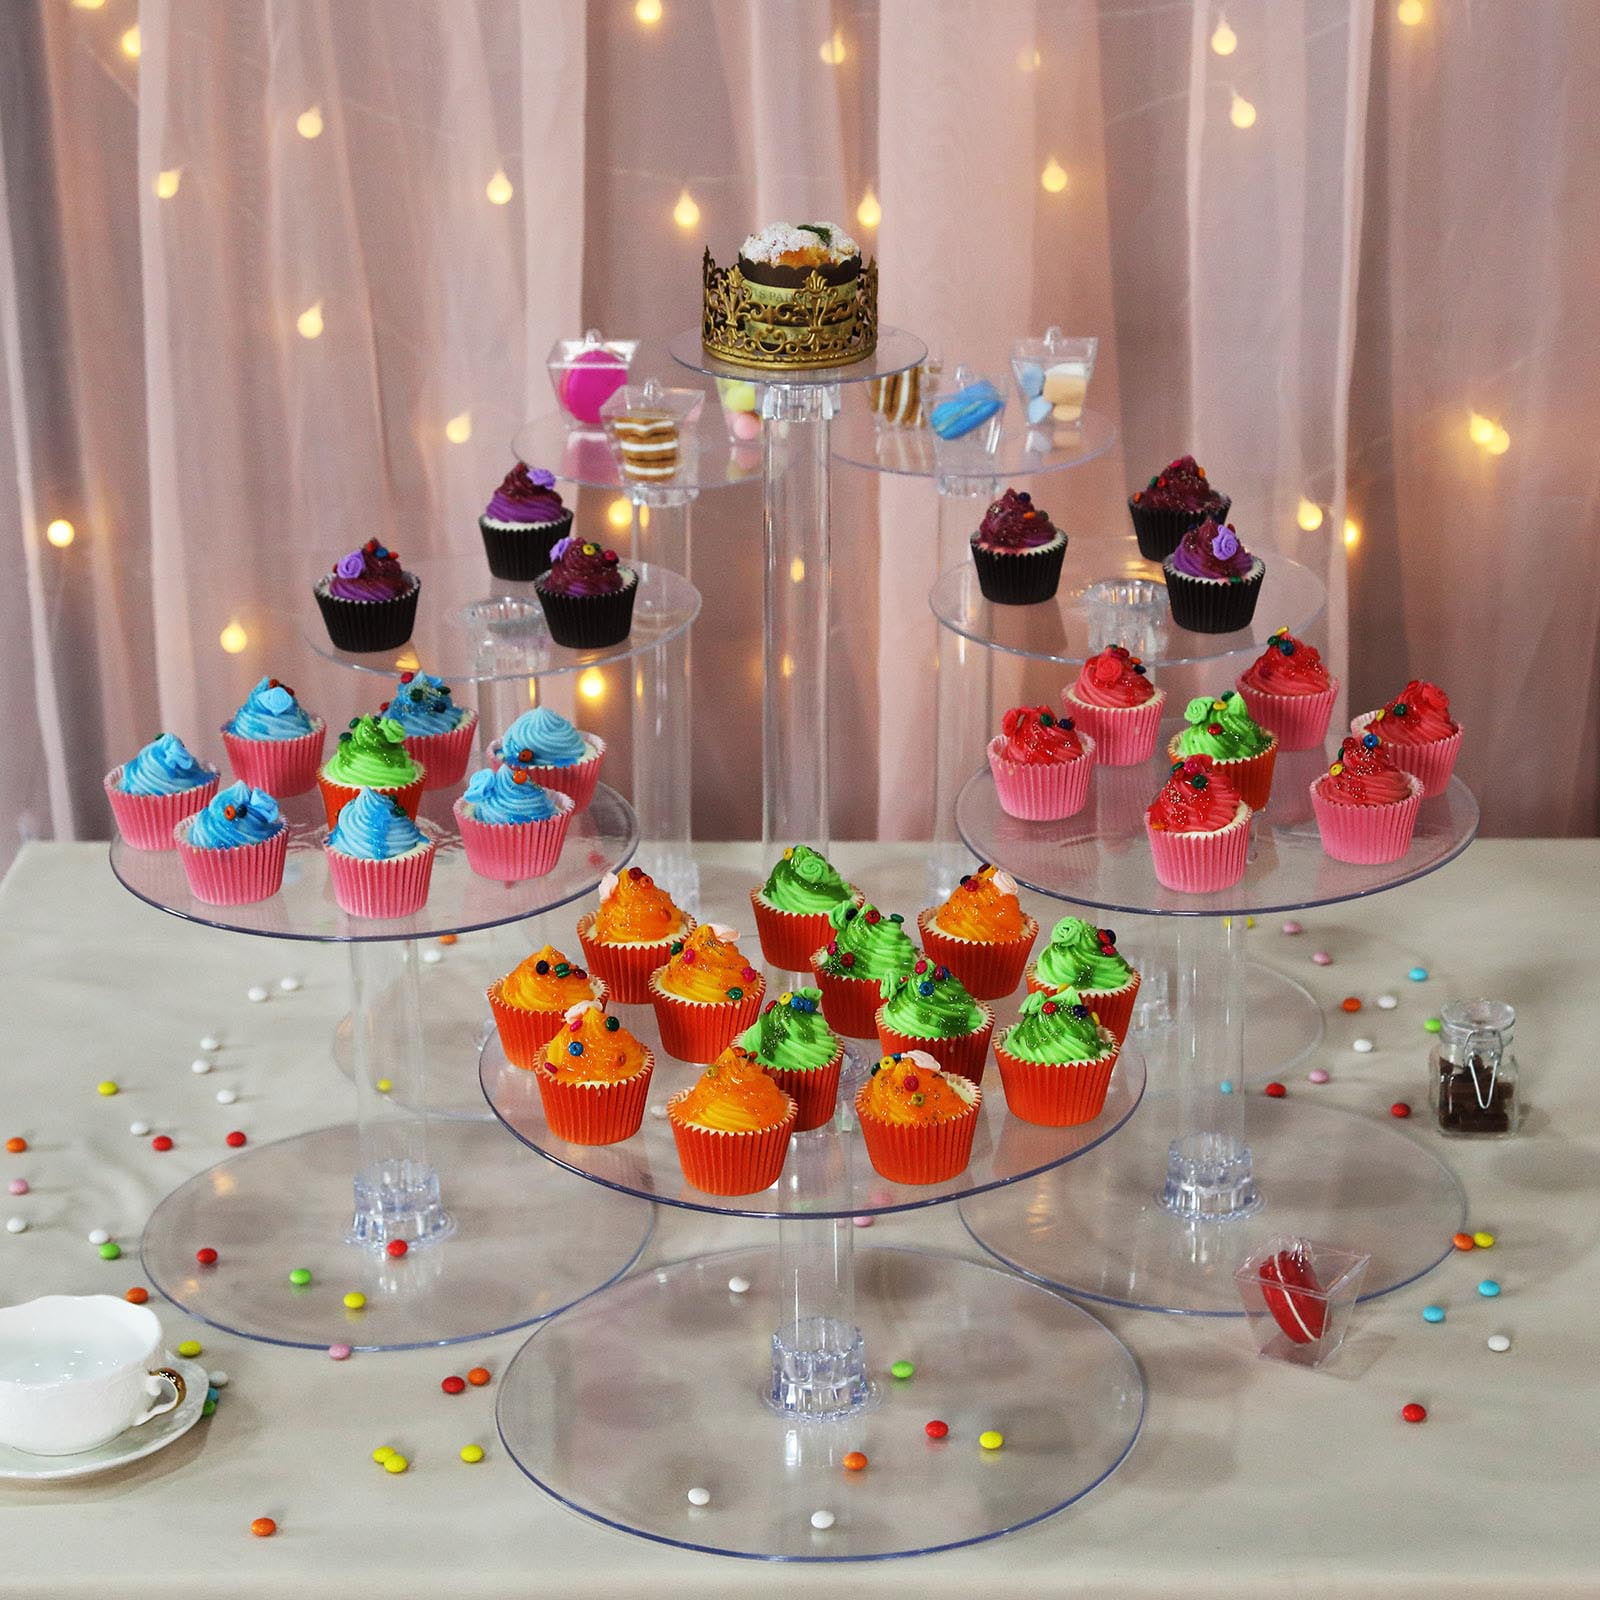 Clear 14-Inch Acrylic Round Cake Cup Cakes Stand Pedestal Tower 